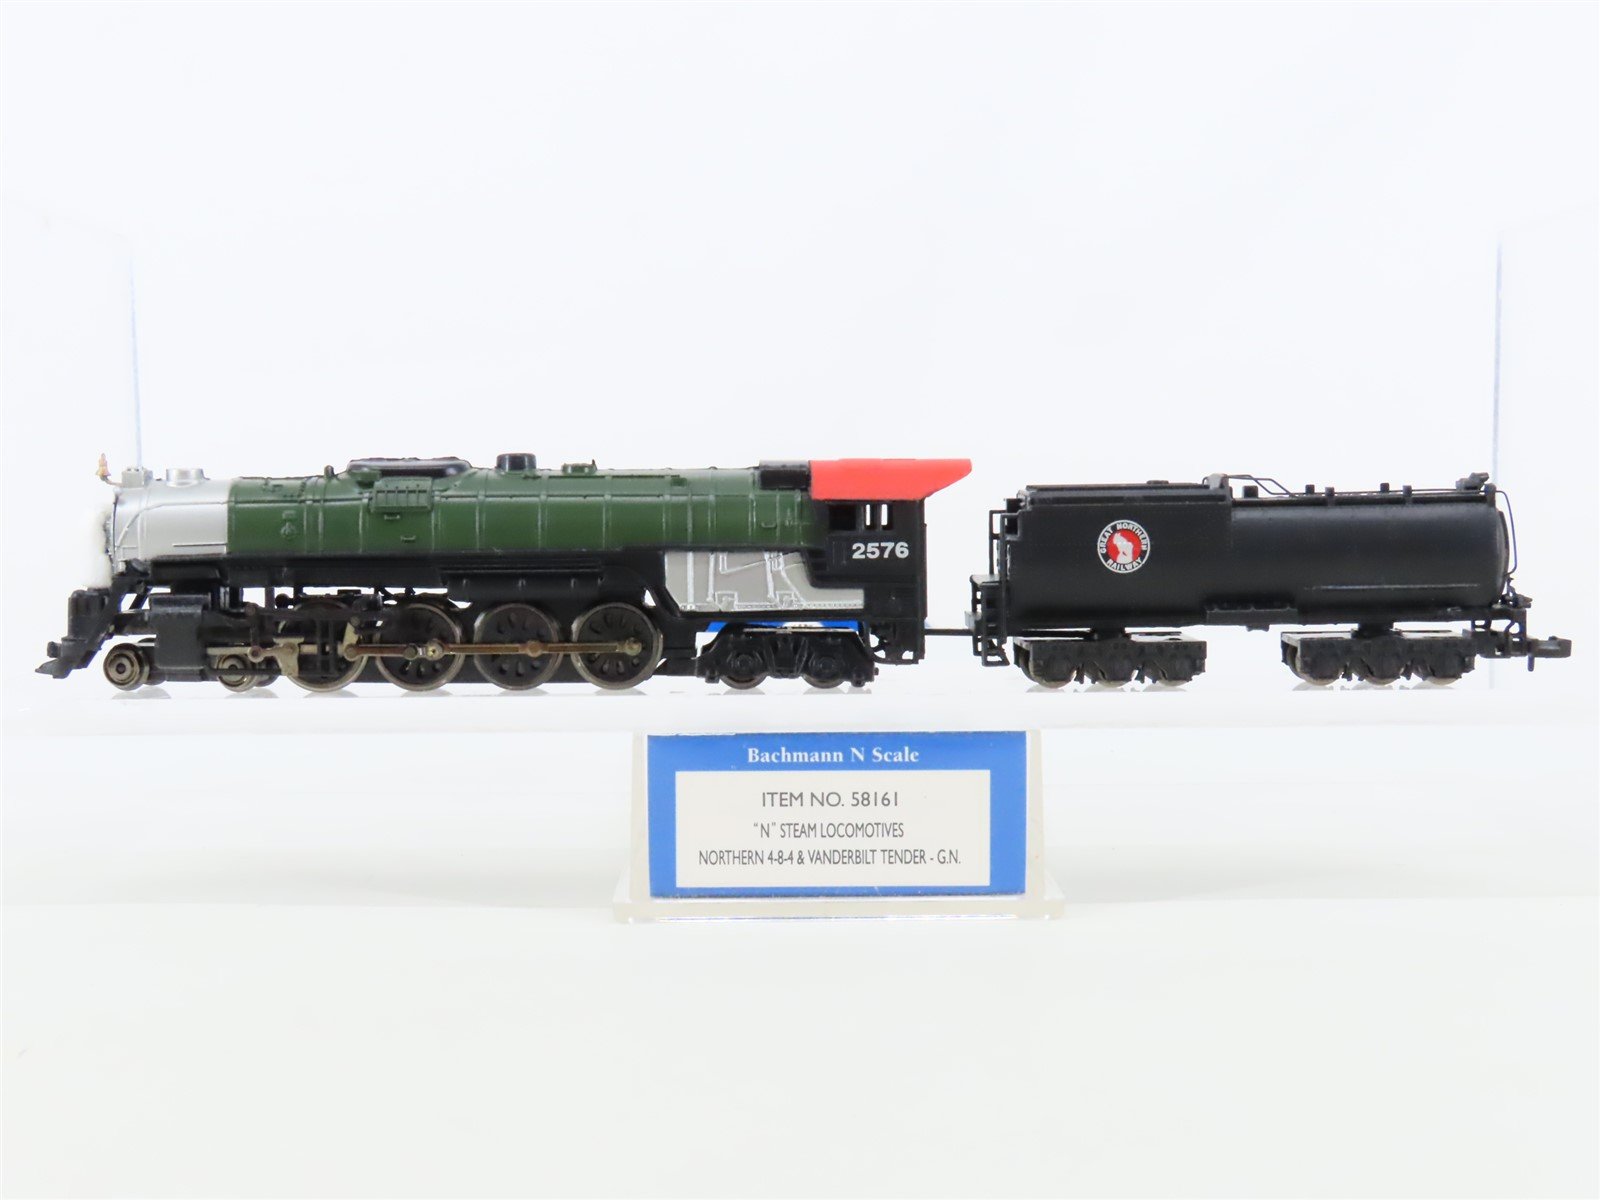 N Scale Bachmann 58161 GN Great Northern 4-8-4 Northern Steam 